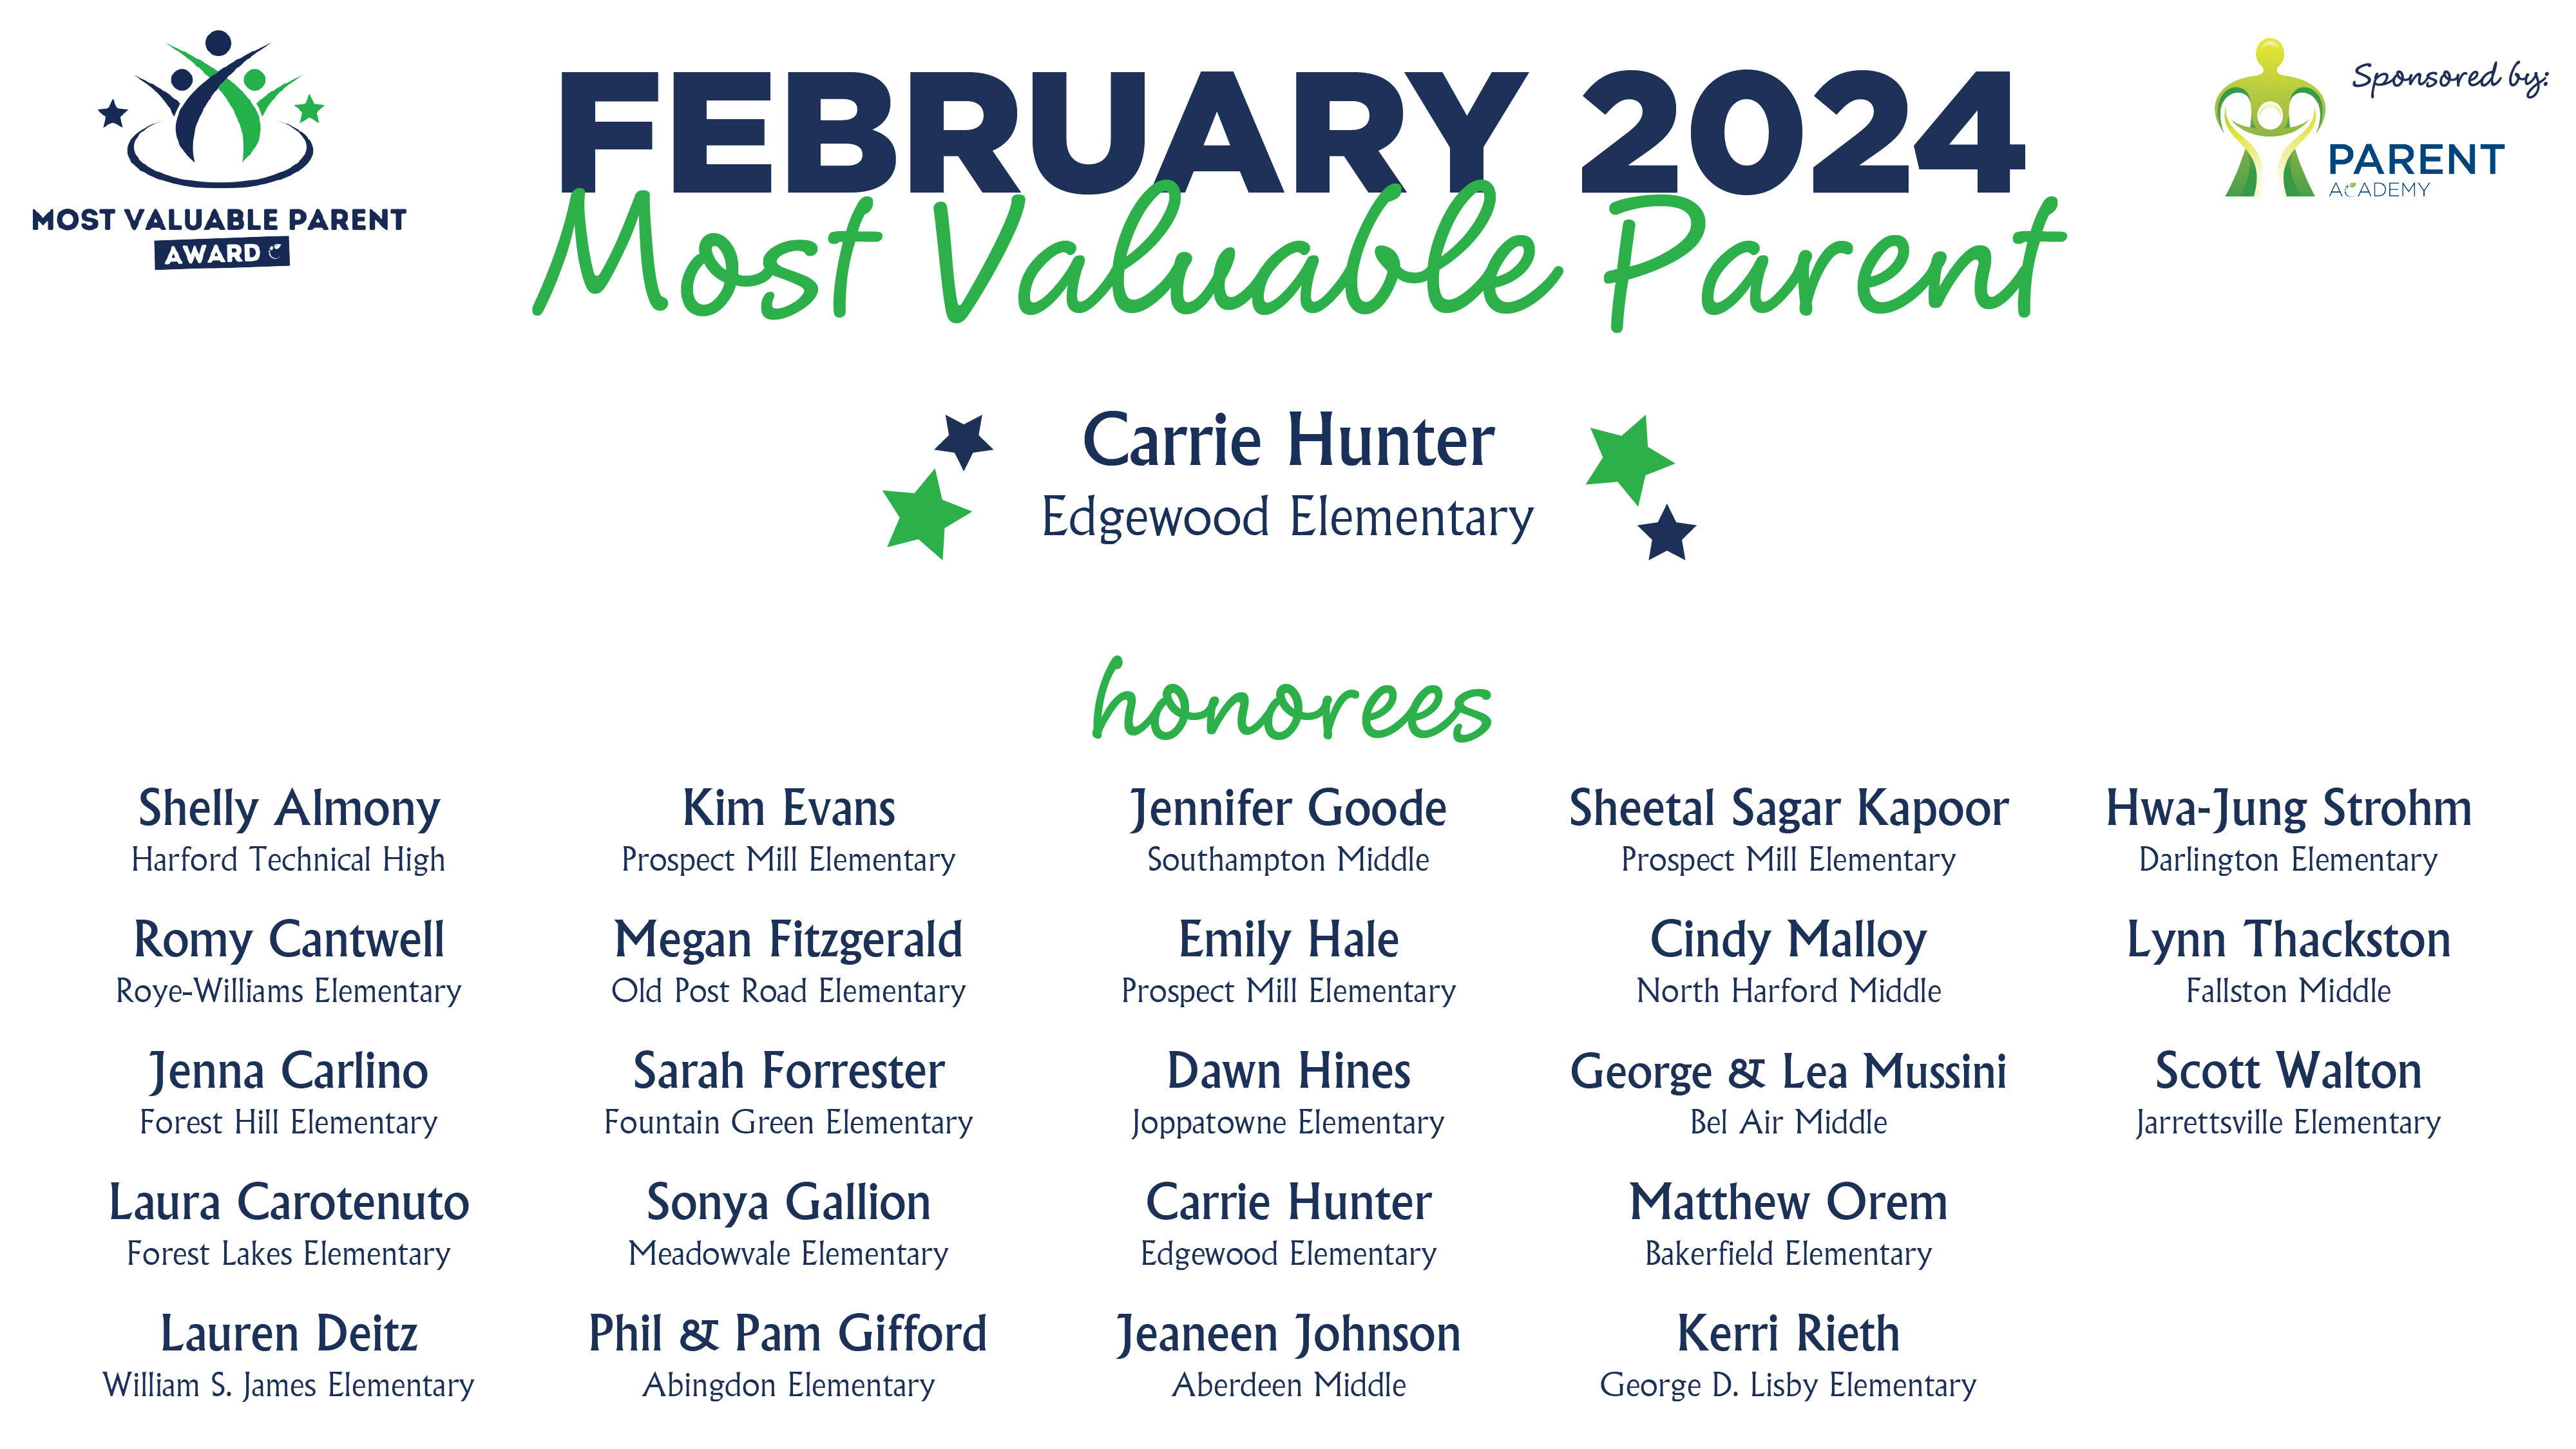 Most Valuable Parent Honorees - February 2024